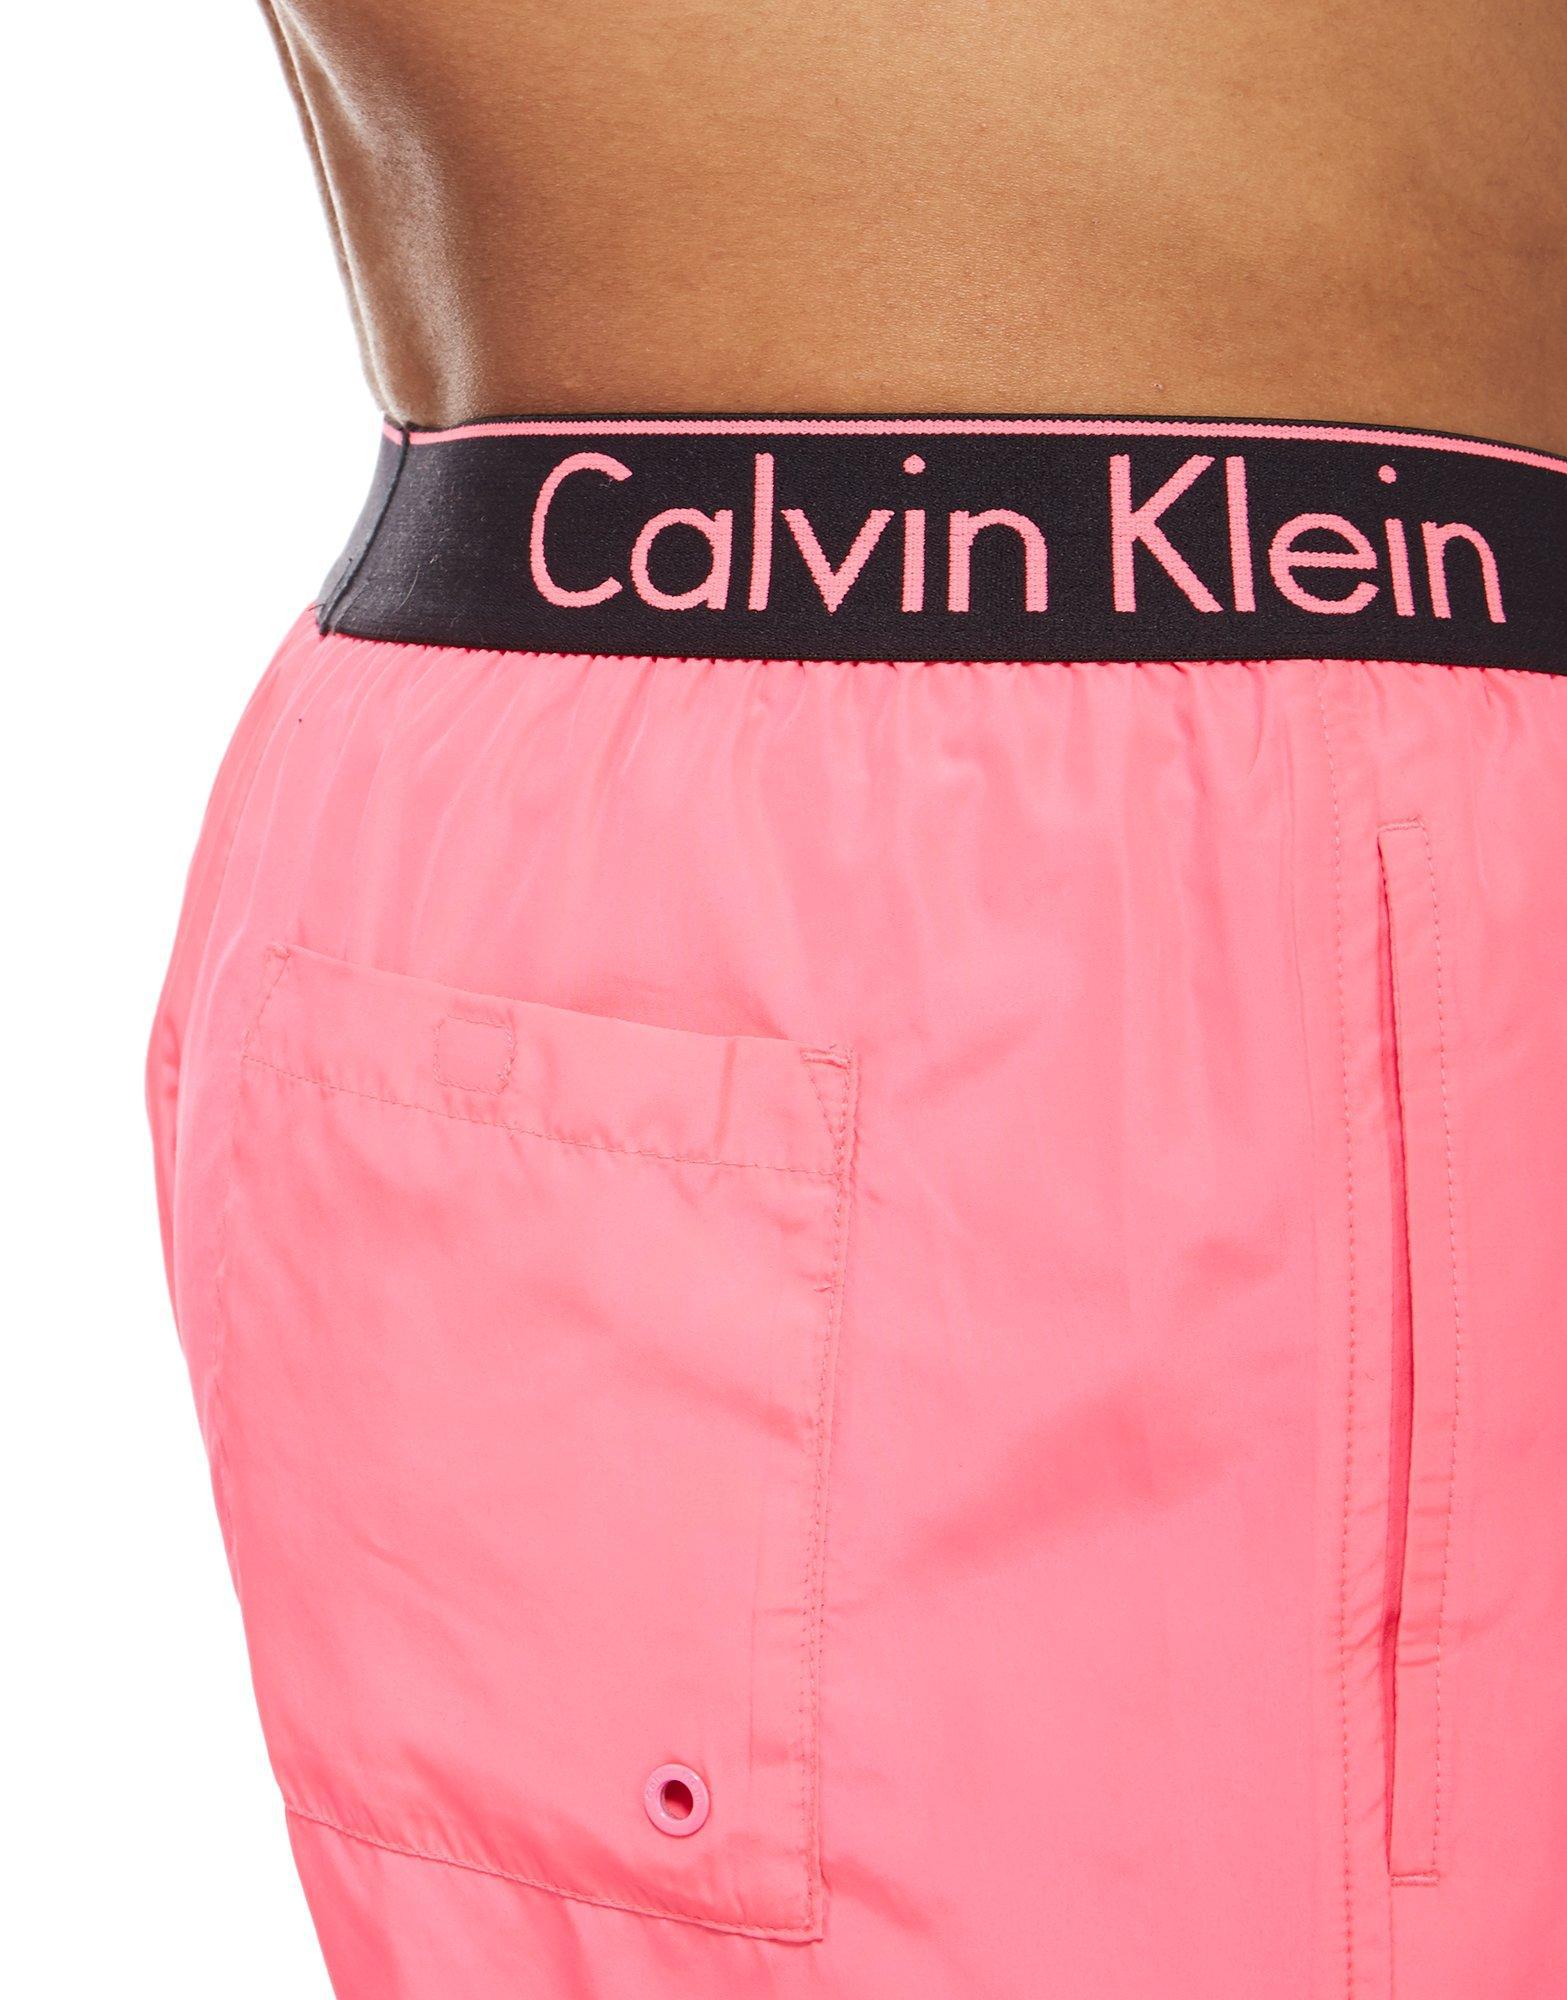 Calvin Klein Synthetic Waistband Swim Shorts in Pink for Men - Lyst